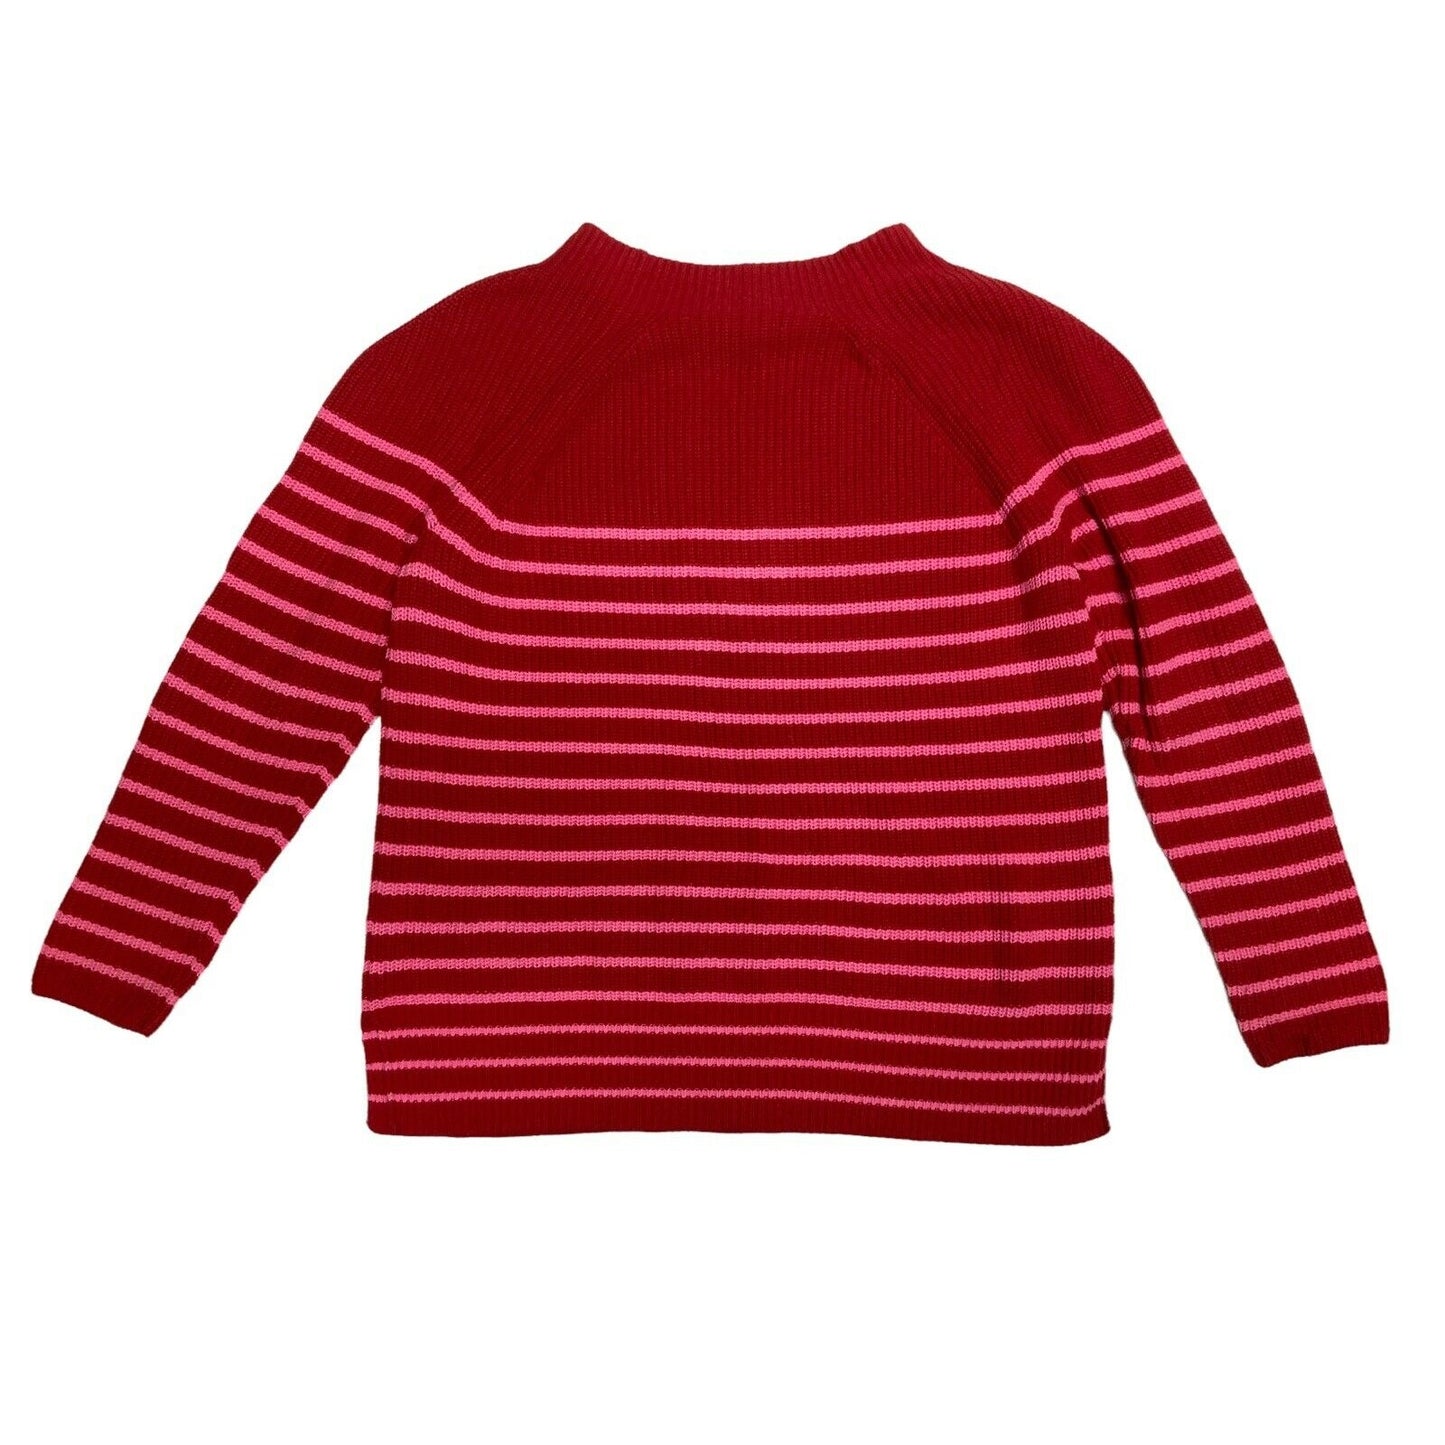 Lands End Womans Pink Red Striped Pullover Sweater Size XL 14-16